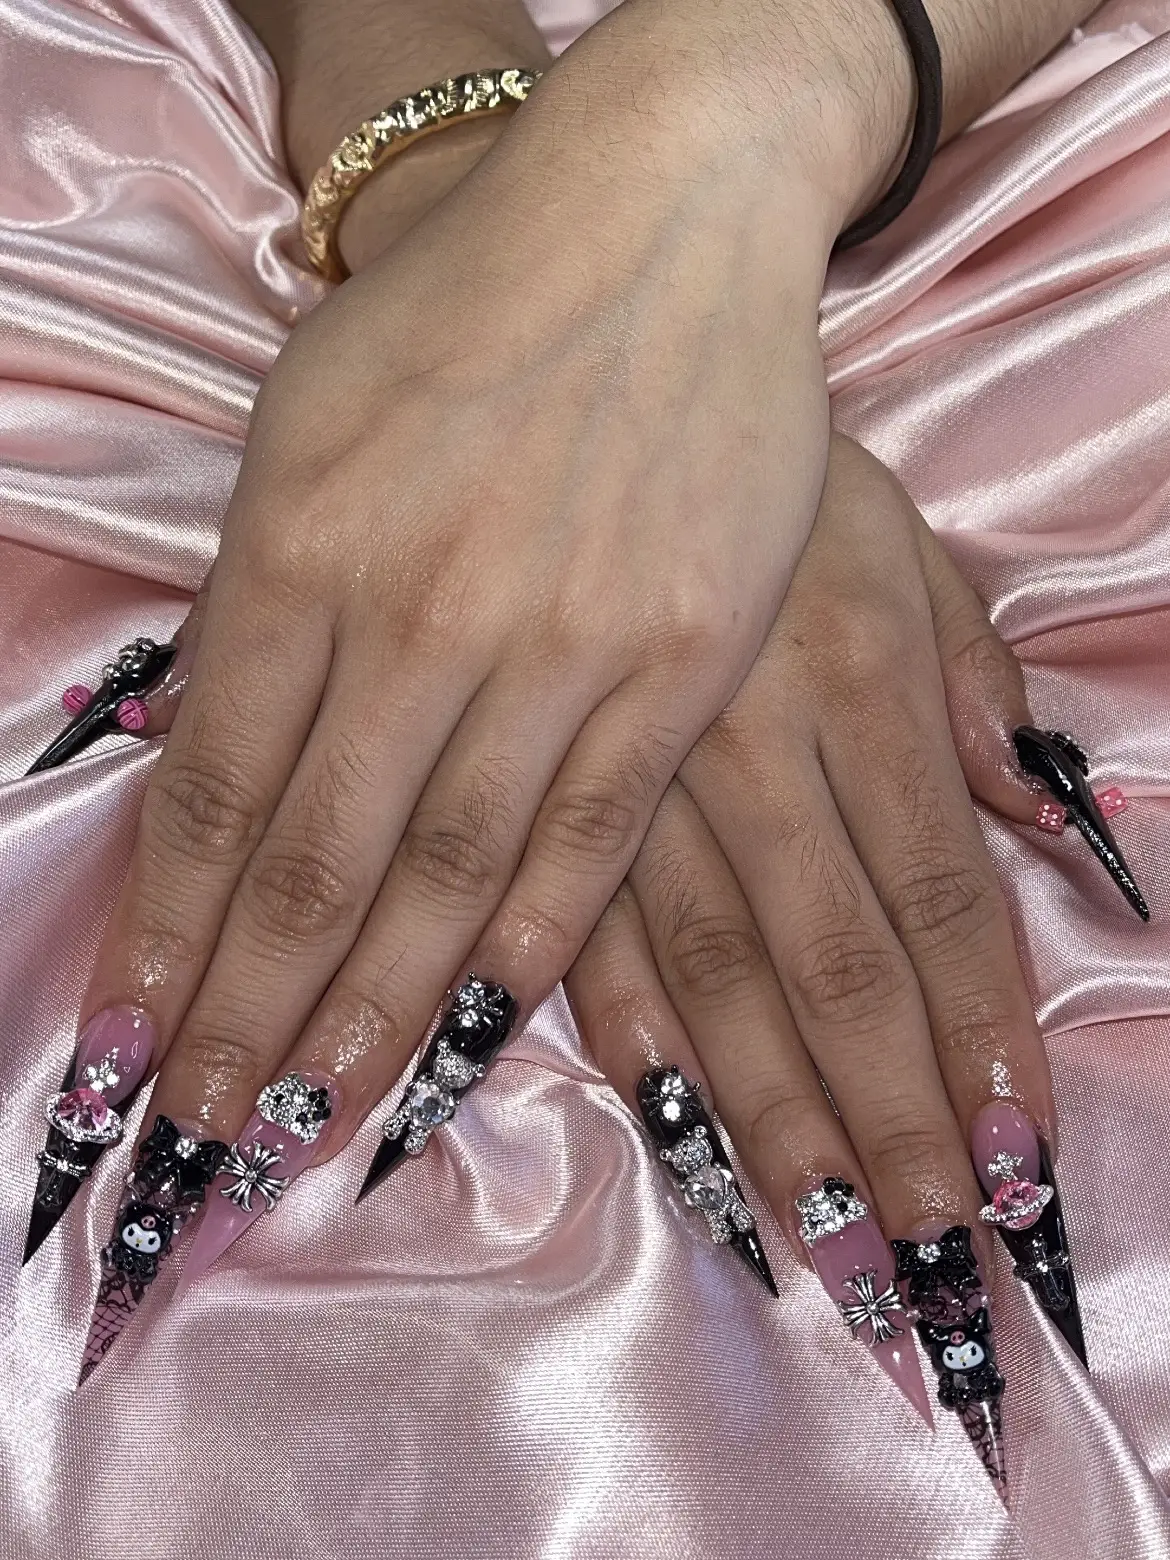 Acrylic Nails Near You in Oakland  Best Places To Get Acrylics in Oakland,  FL